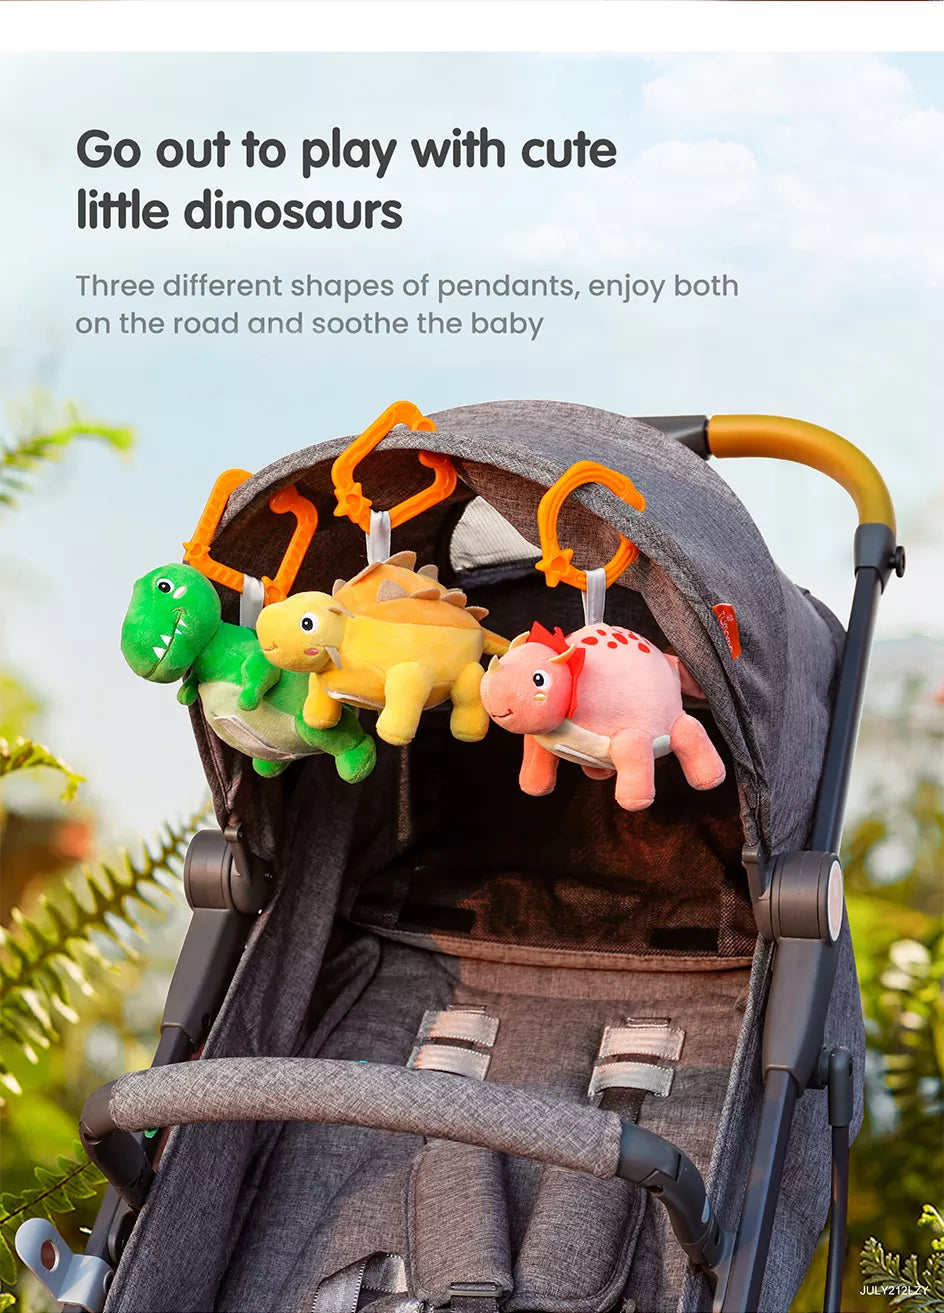 Baby stroller playing with several plush dinosaur toys hanging from it